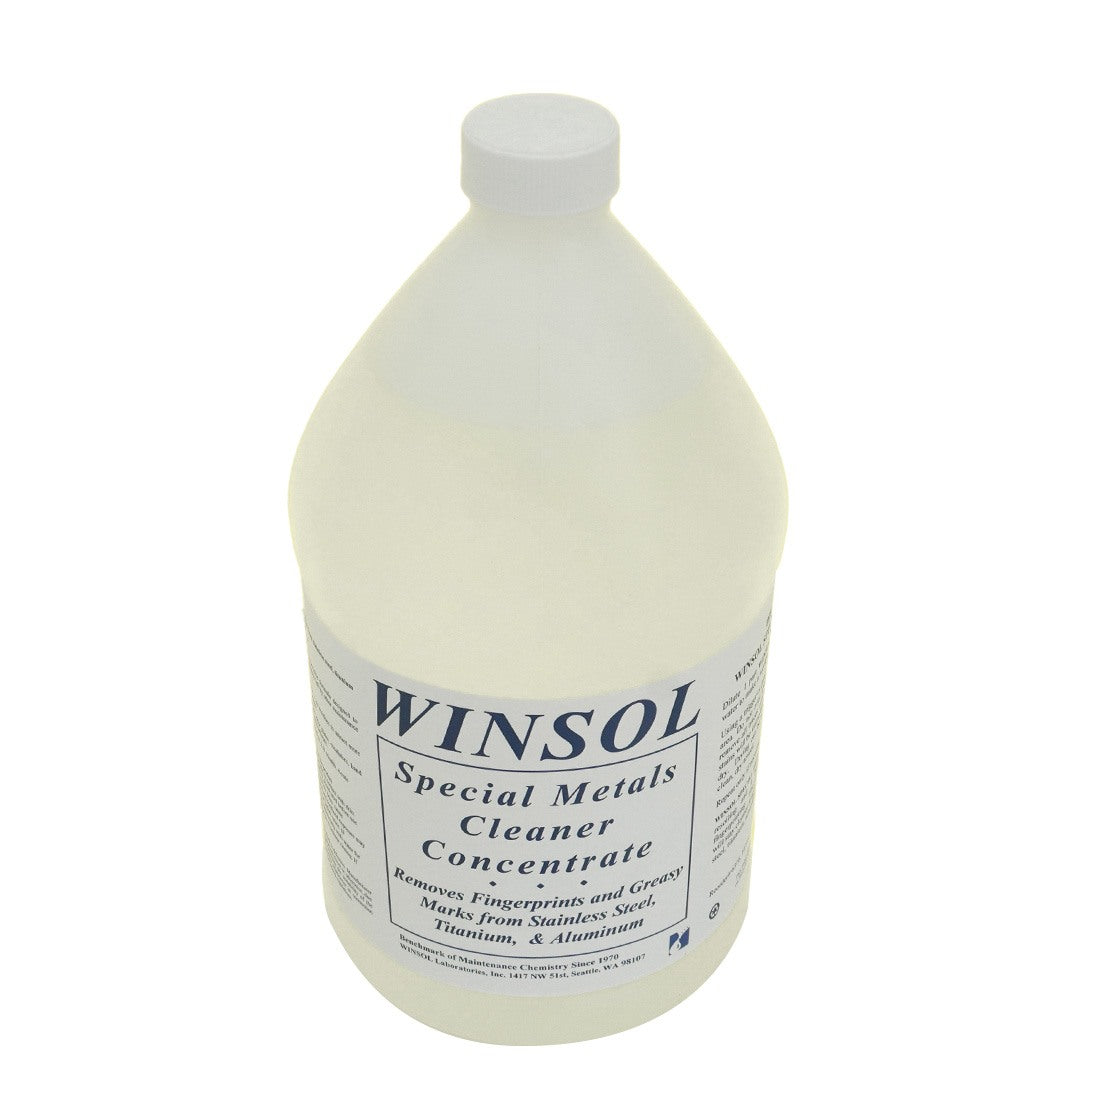 Winsol Special Metals Cleaner Top Angle View